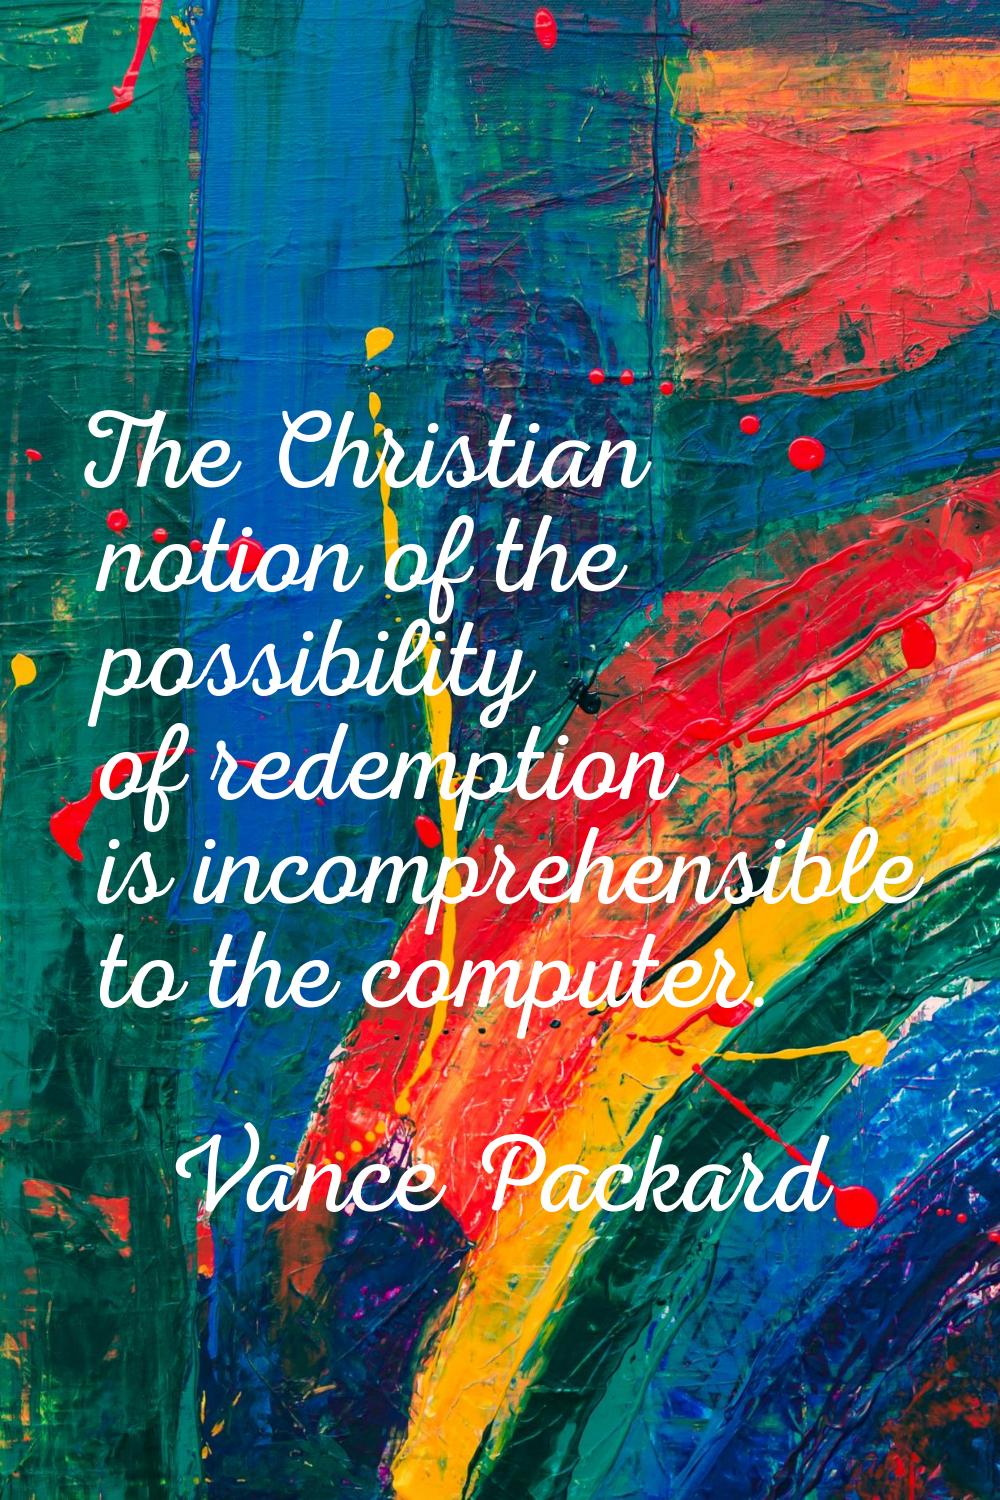 The Christian notion of the possibility of redemption is incomprehensible to the computer.